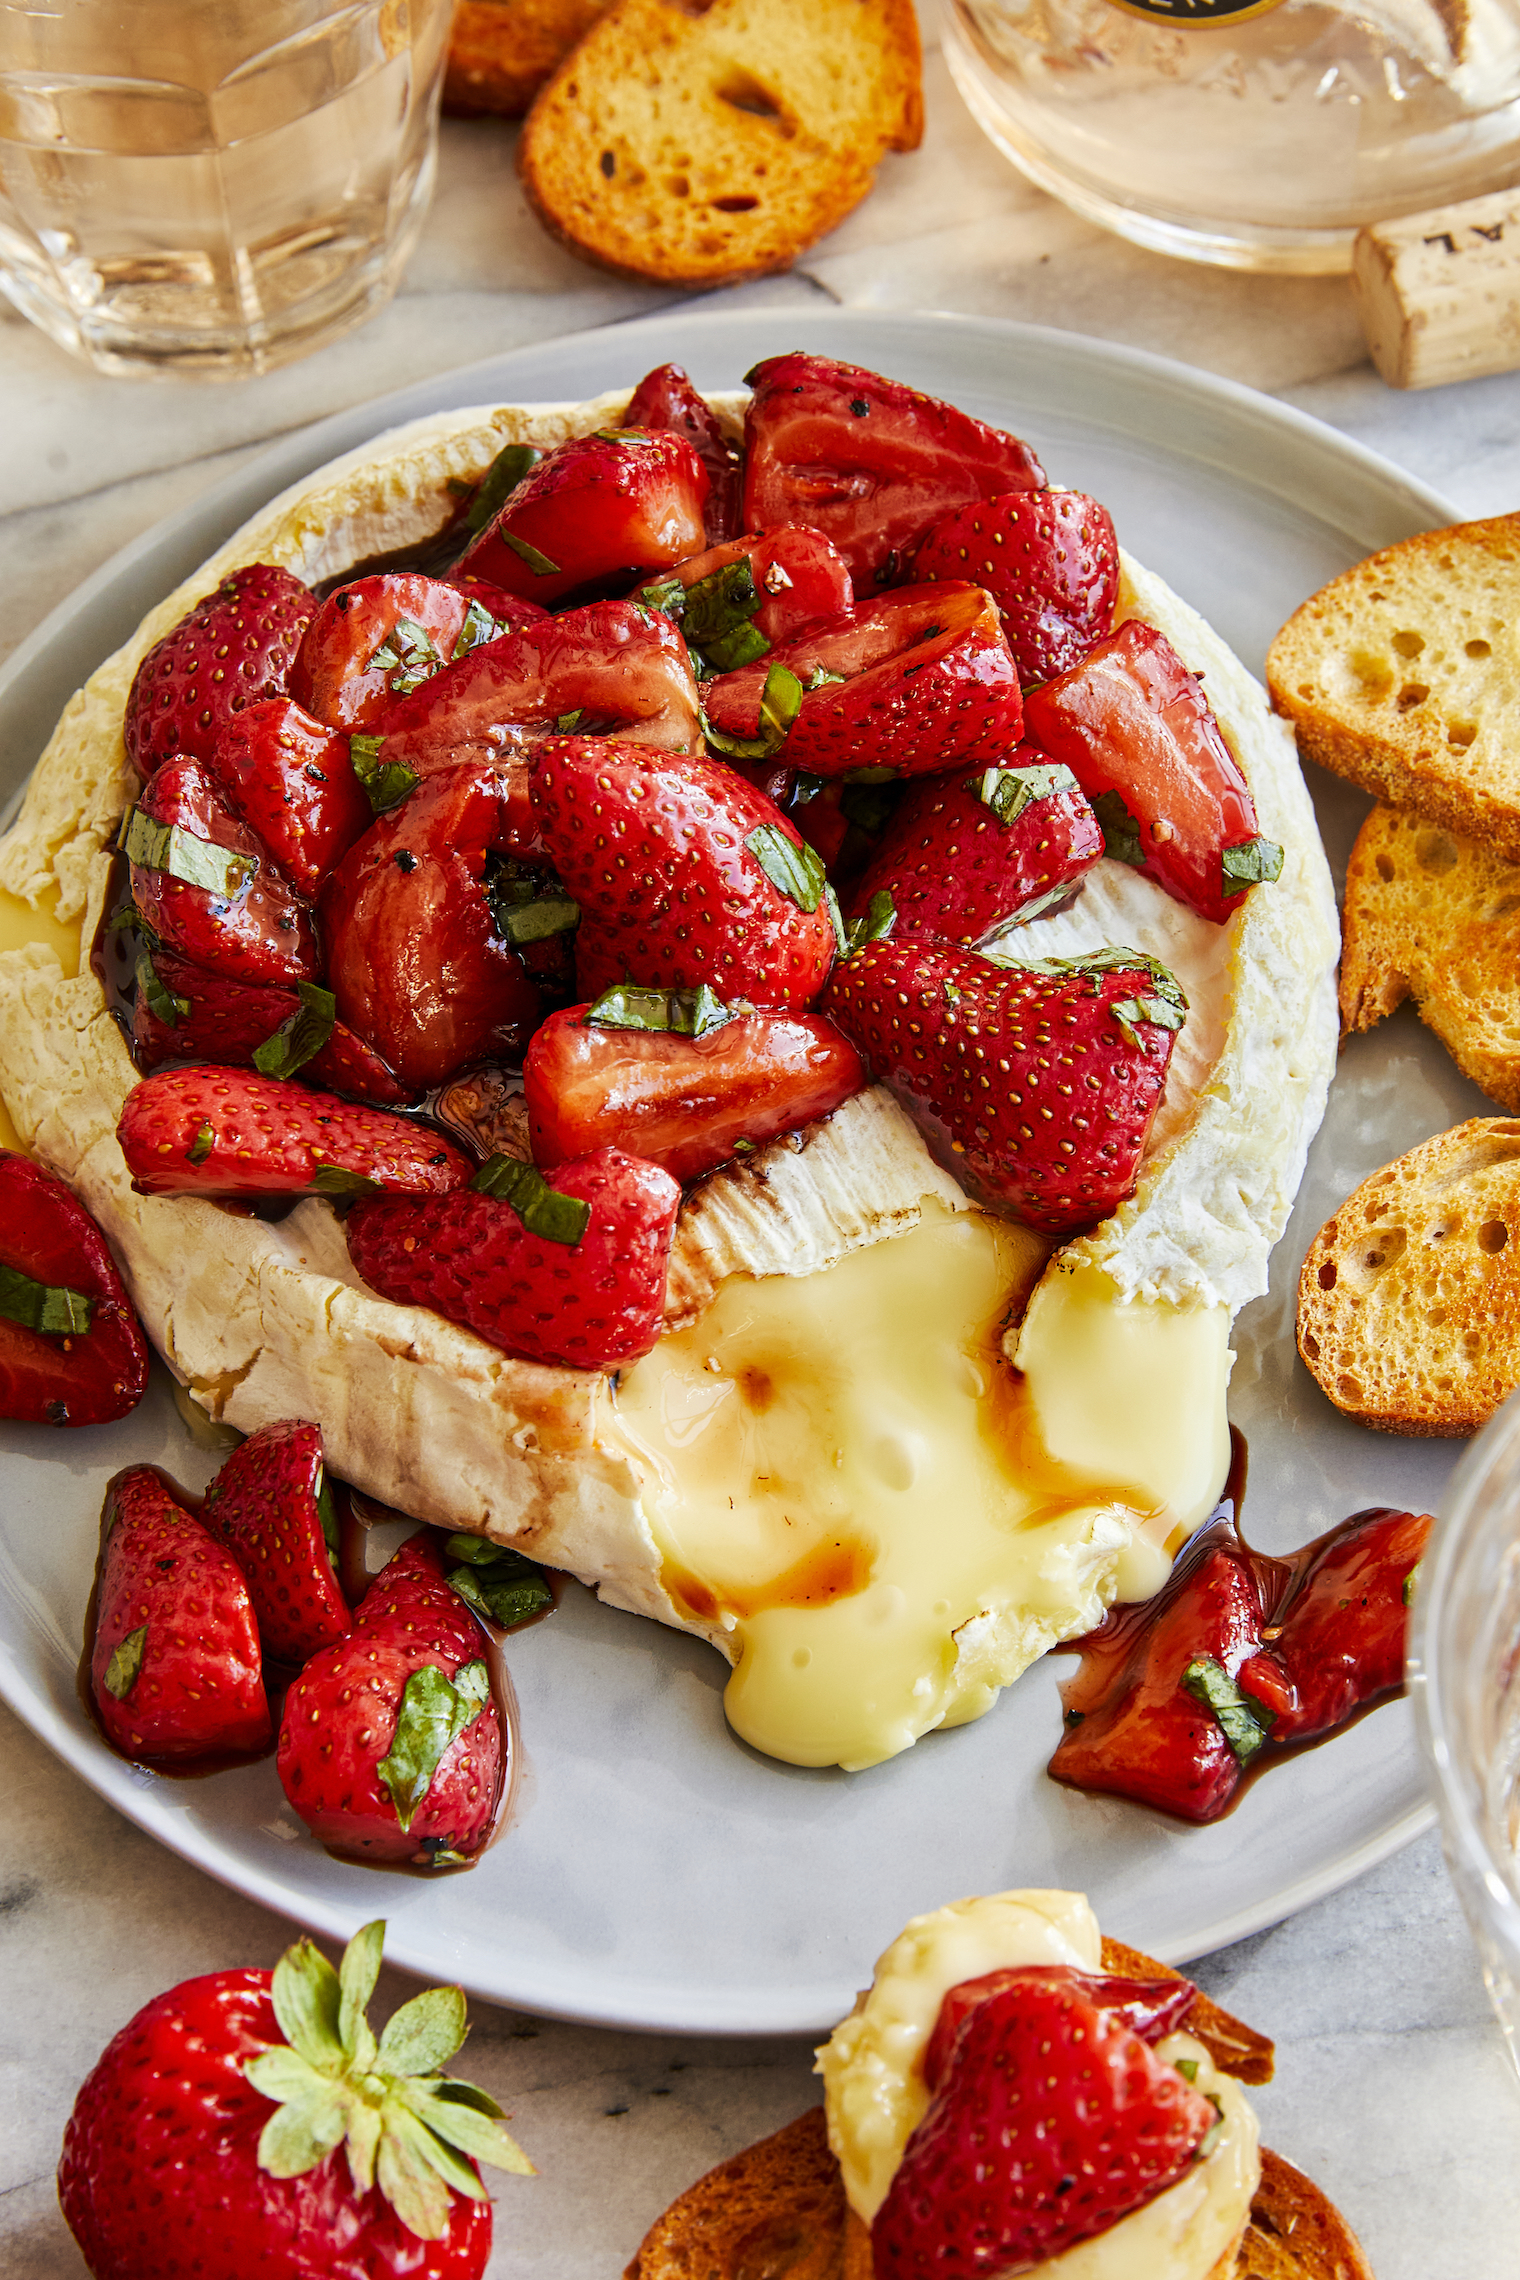 Strawberry Baked Brie - Damn Delicious